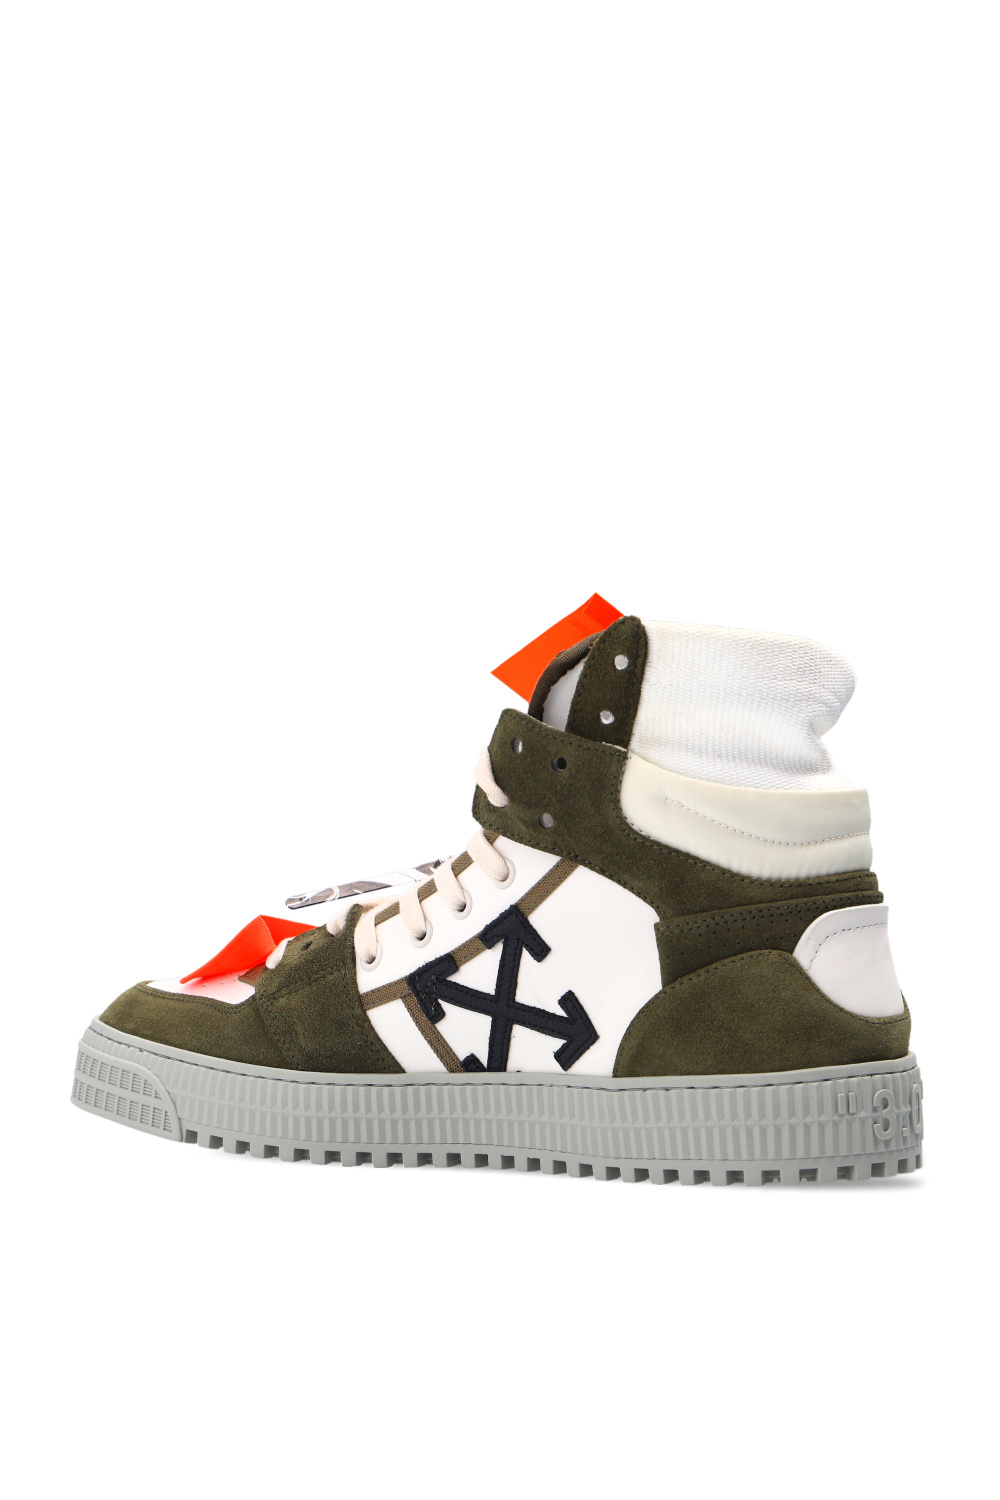 Off-White California Mens Steel Toe Cap Safety Boots